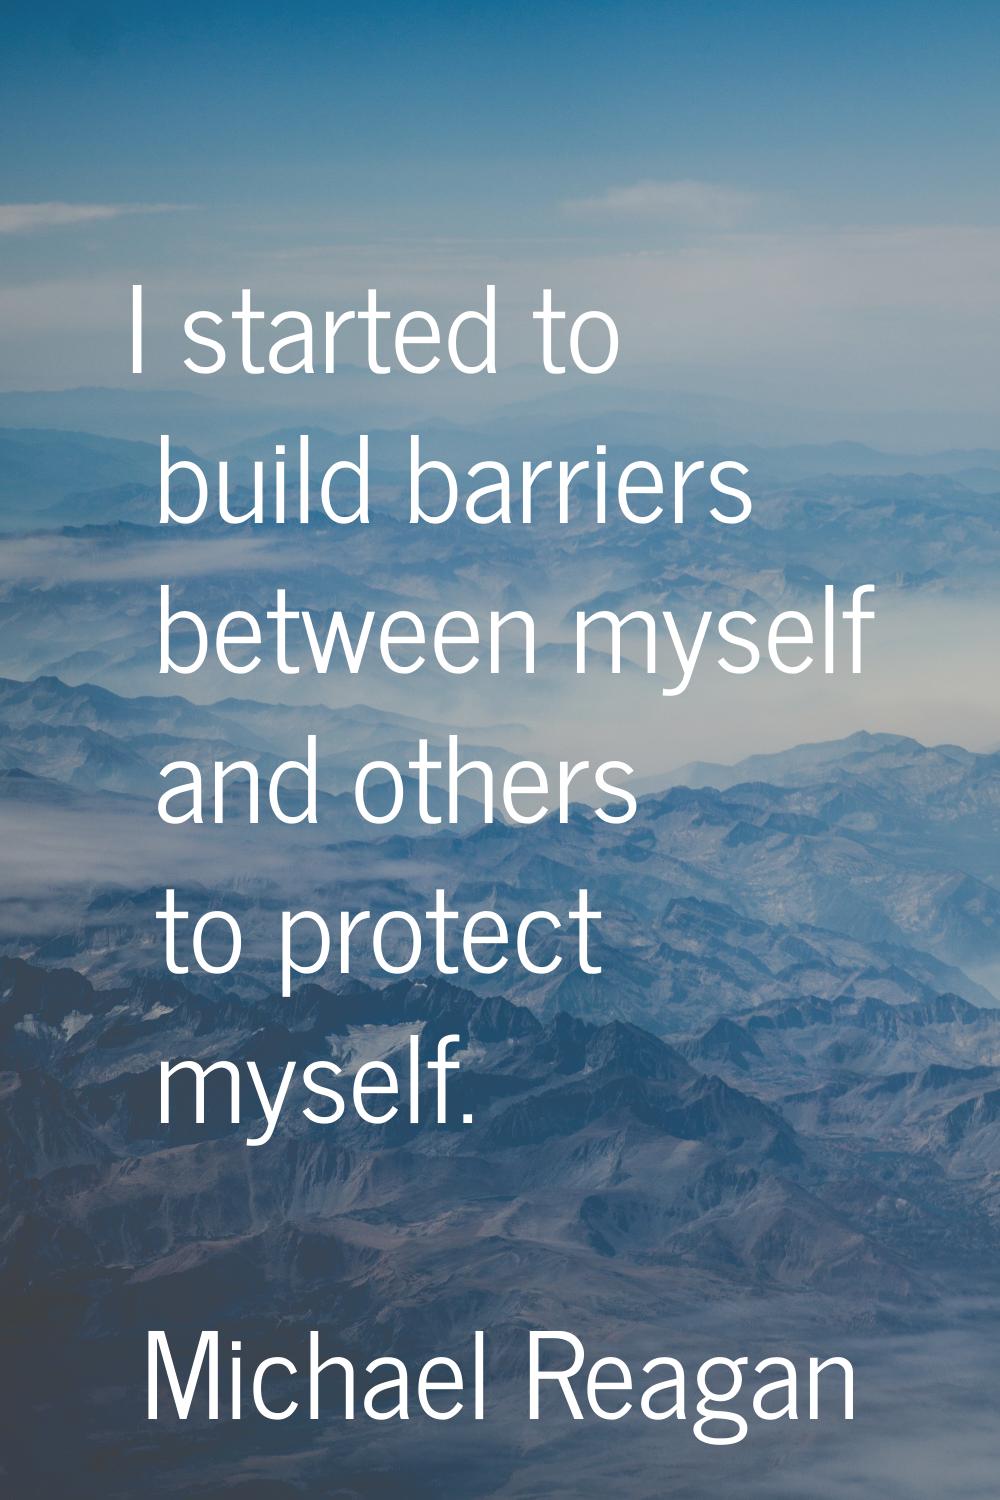 I started to build barriers between myself and others to protect myself.